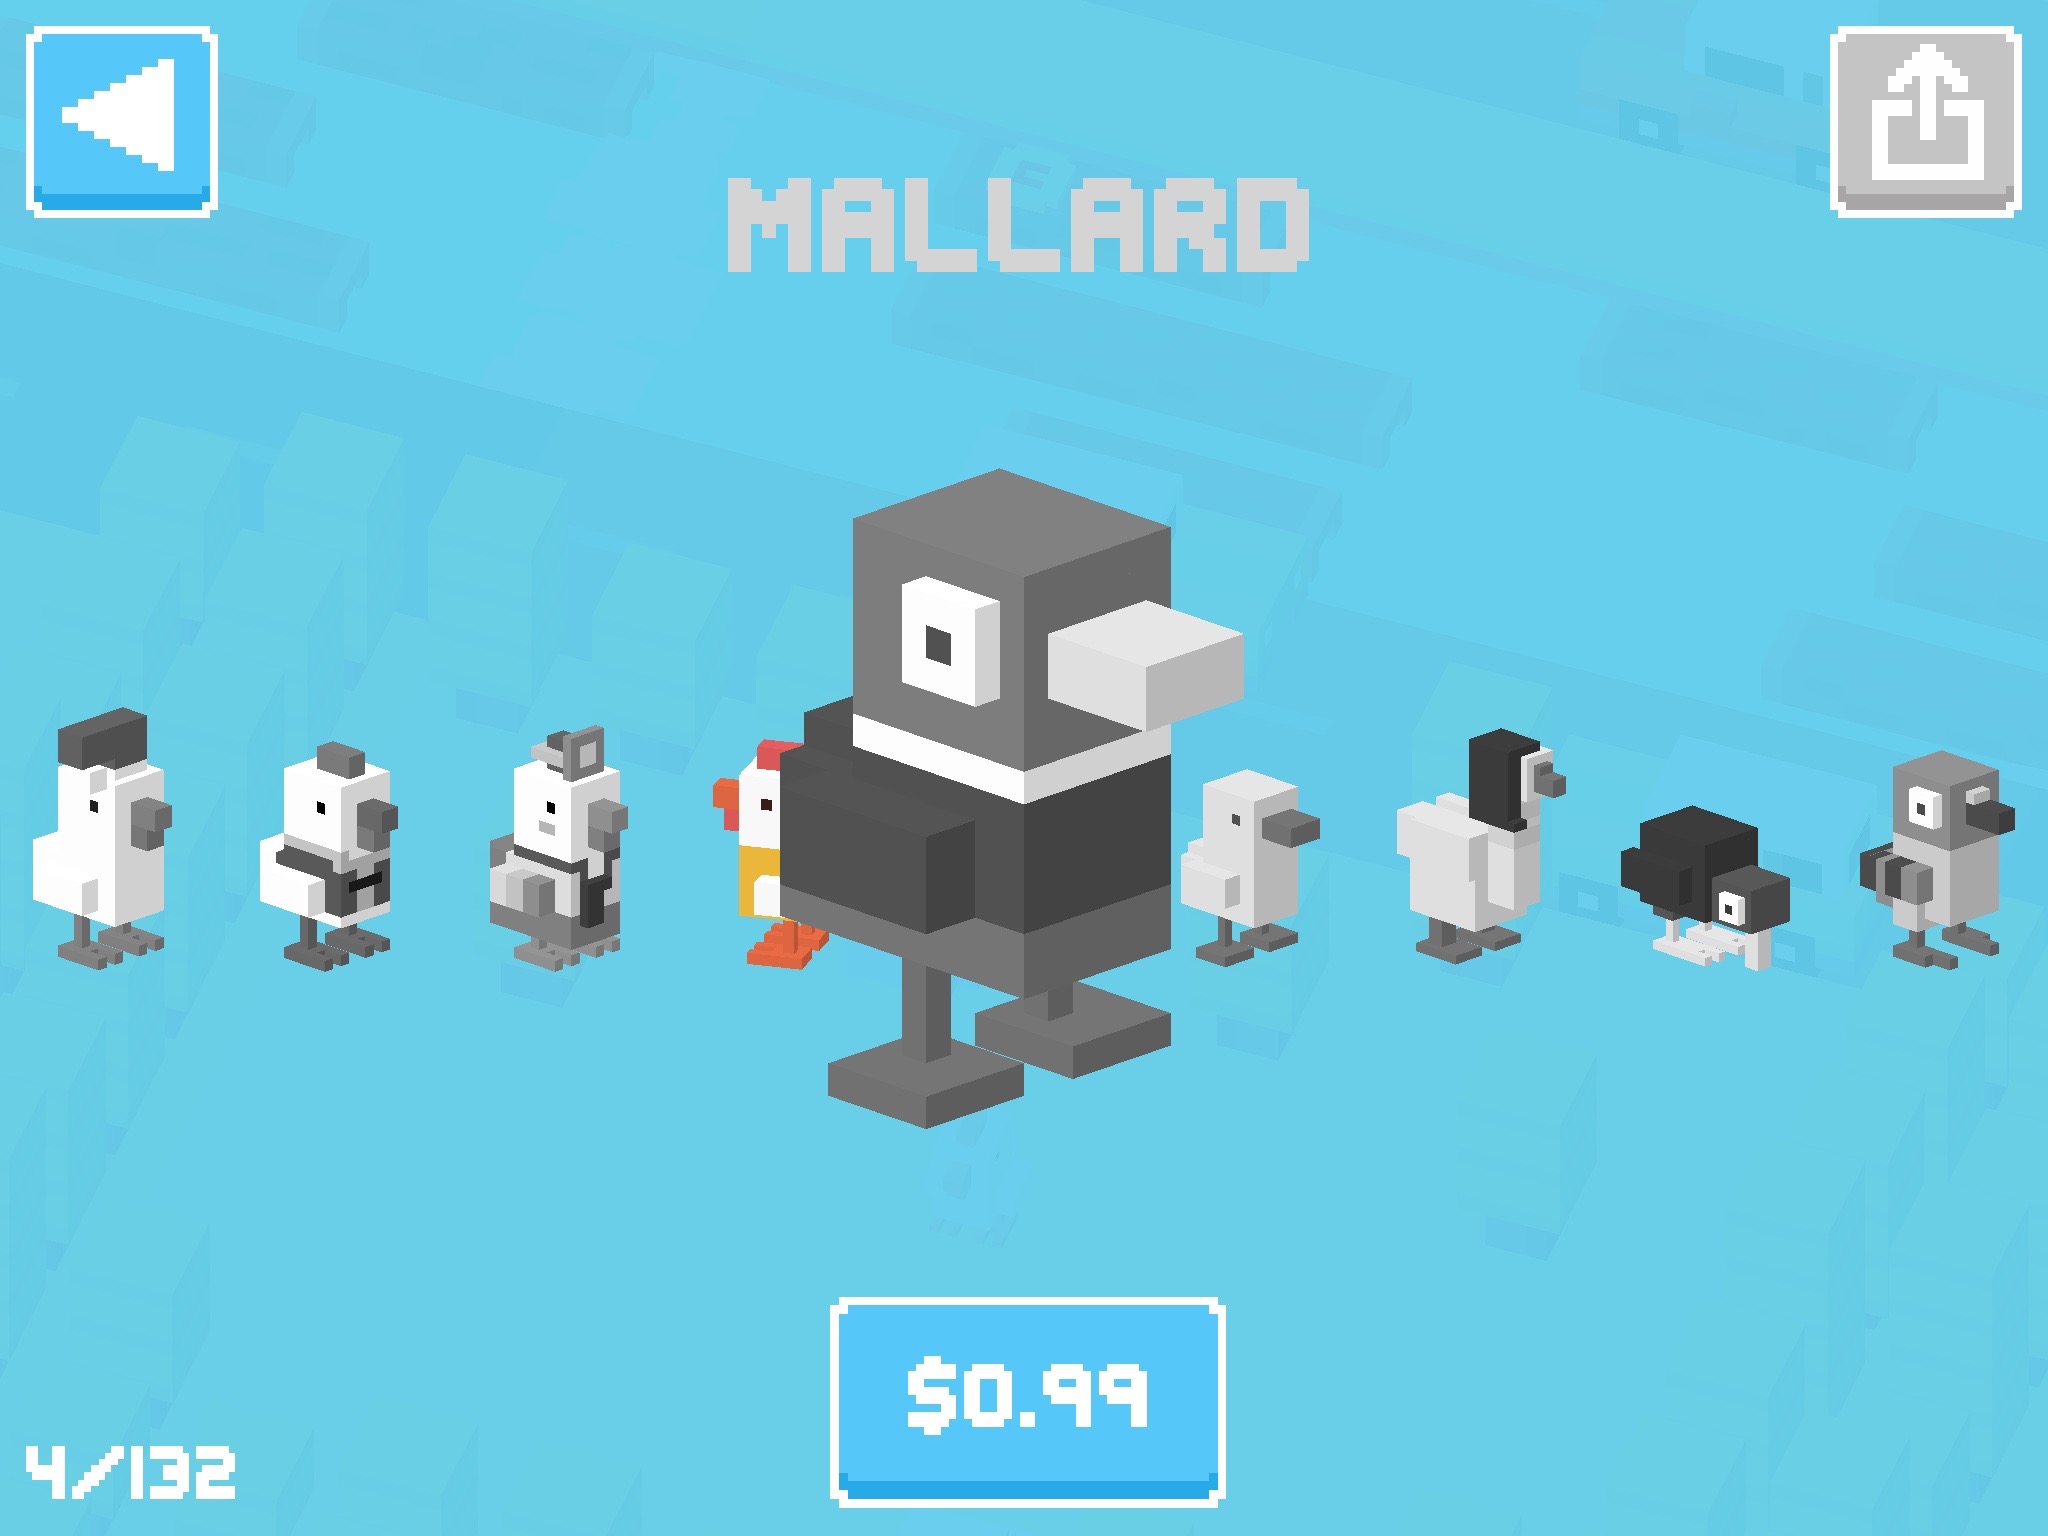 crossy road game type